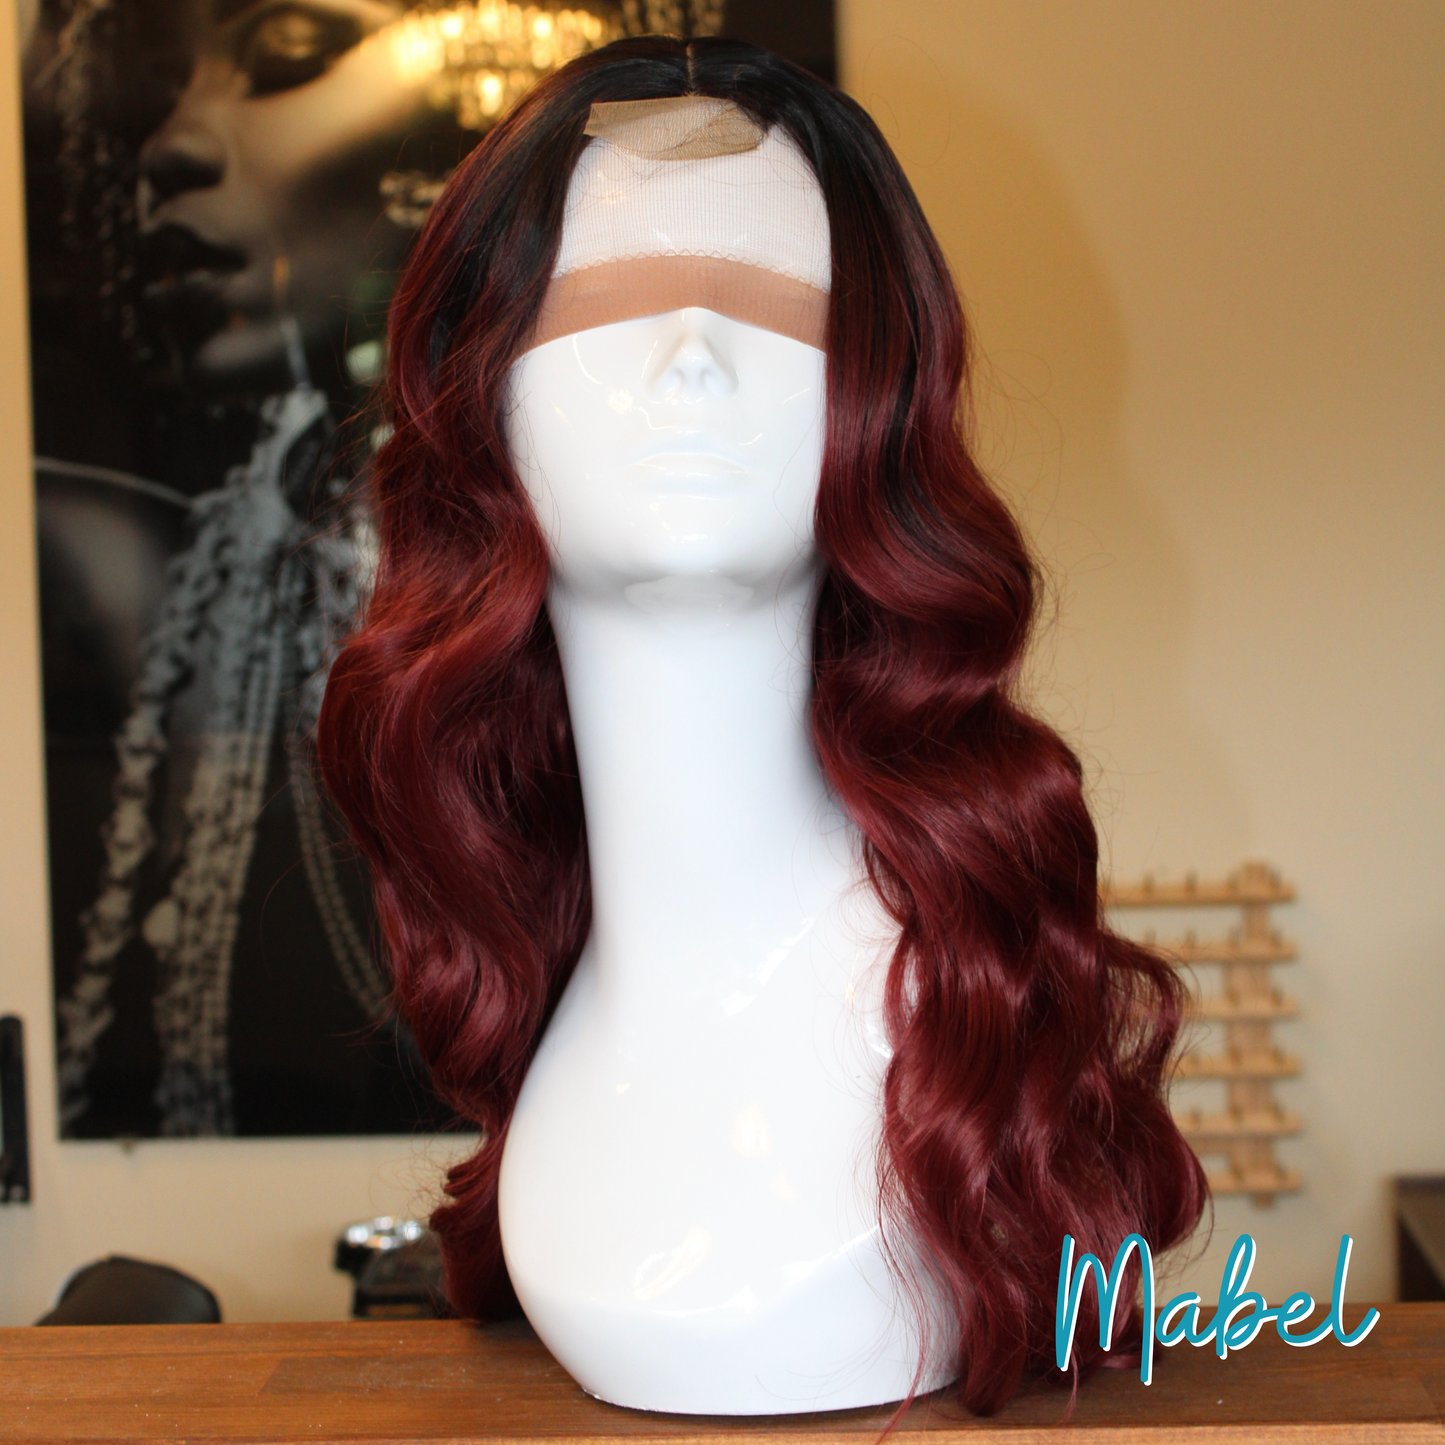 Mabel - 26", 2 x 4 Closure, Body Wave, Synthetic Wig - Red Ombre